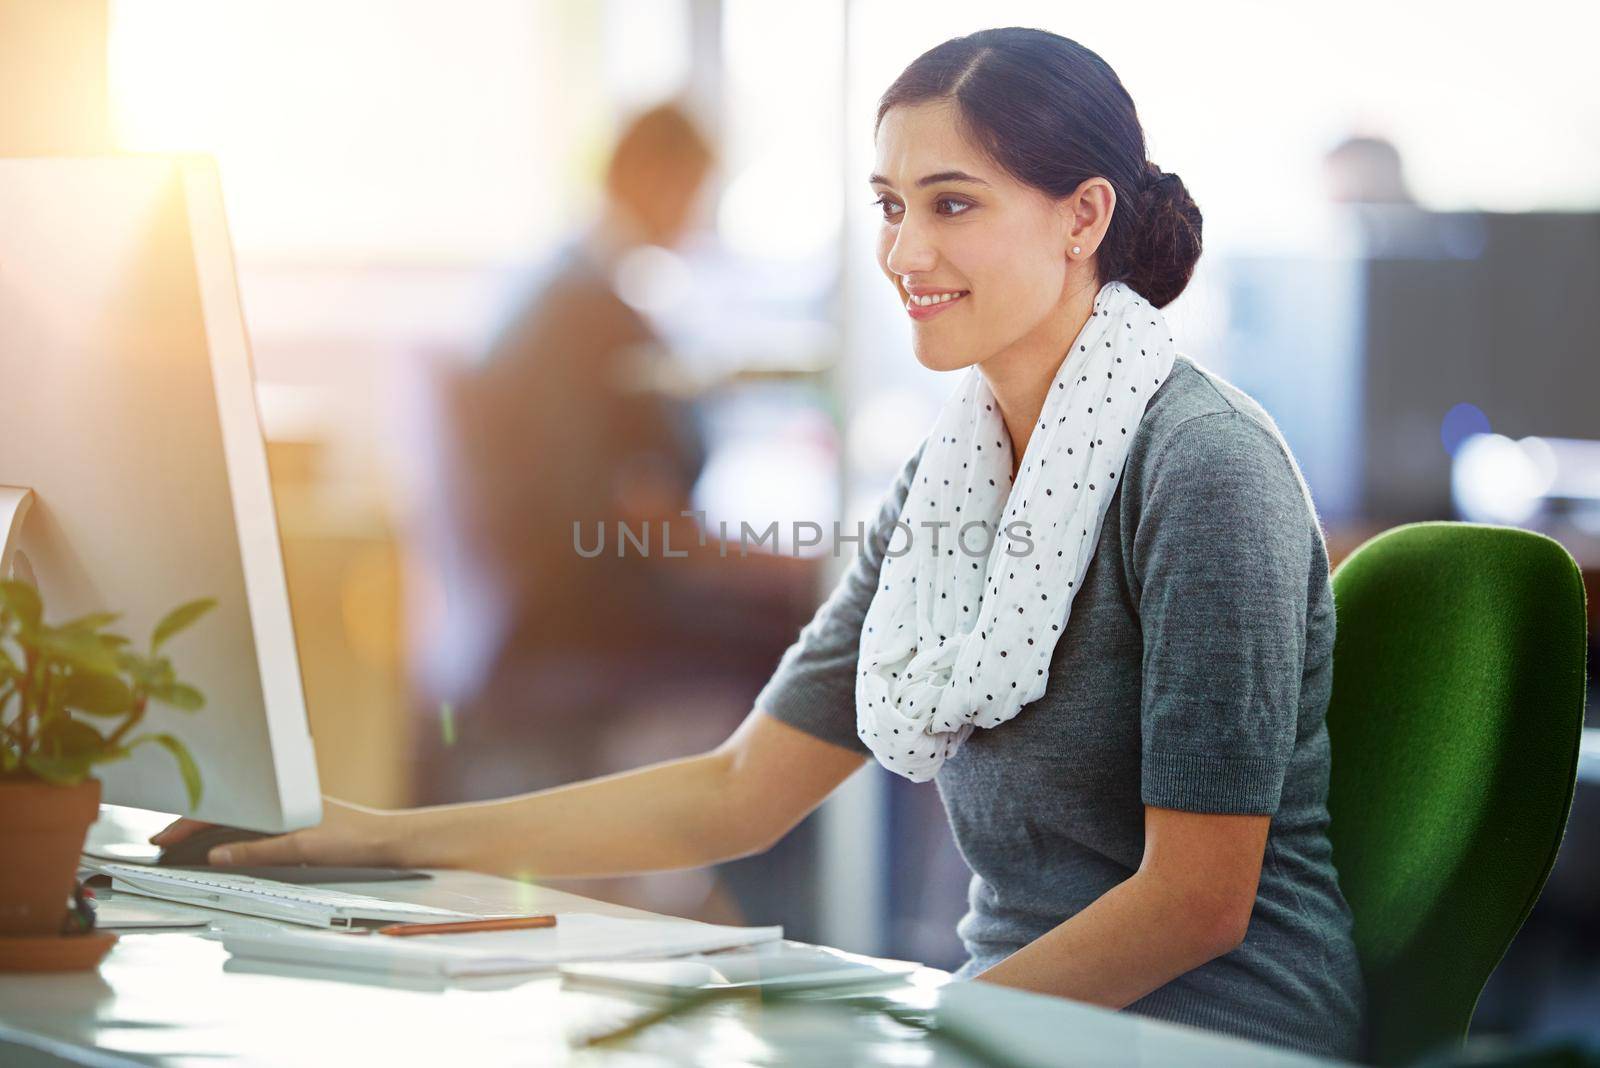 Young smiling female designer working on a computer in a modern office. Creative woman at her work desk browsing inspiration for designs on a pc at the workplace, over copy space background